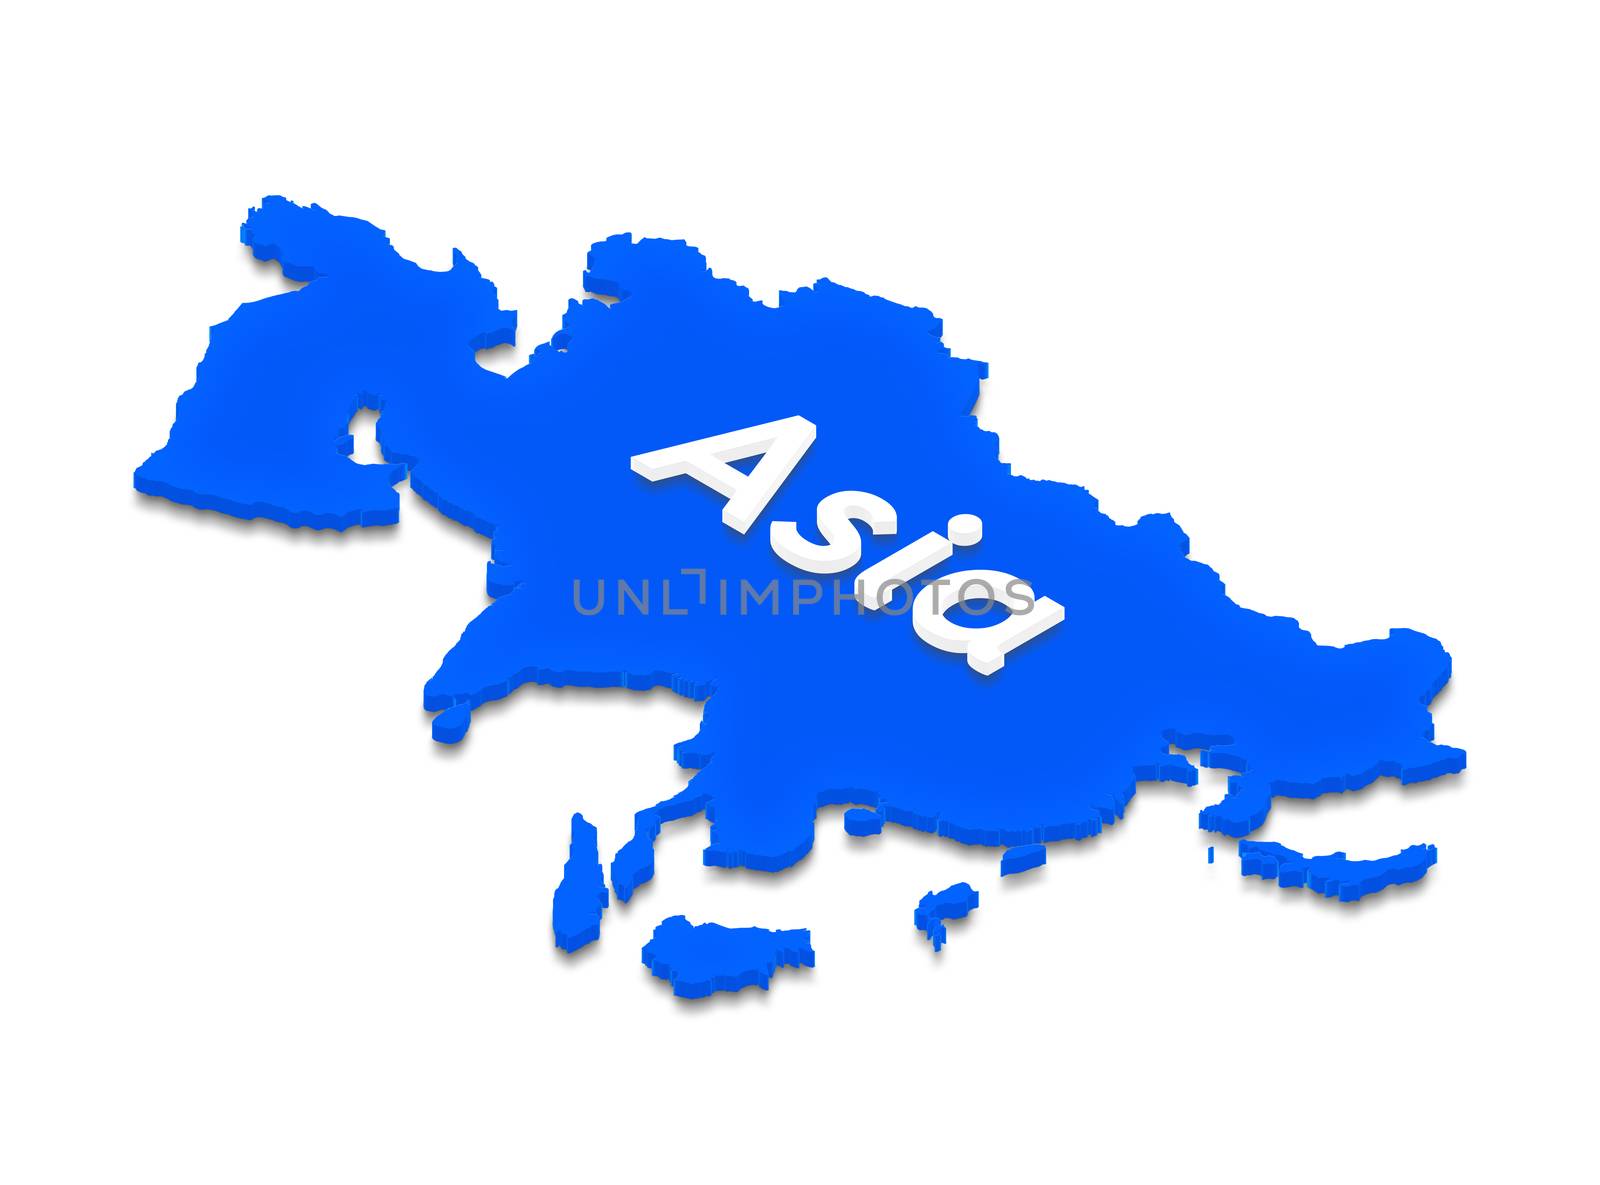 Illustration of a blue ground map of Asia on isolated background. Left 3D isometric projection with the name of continent.